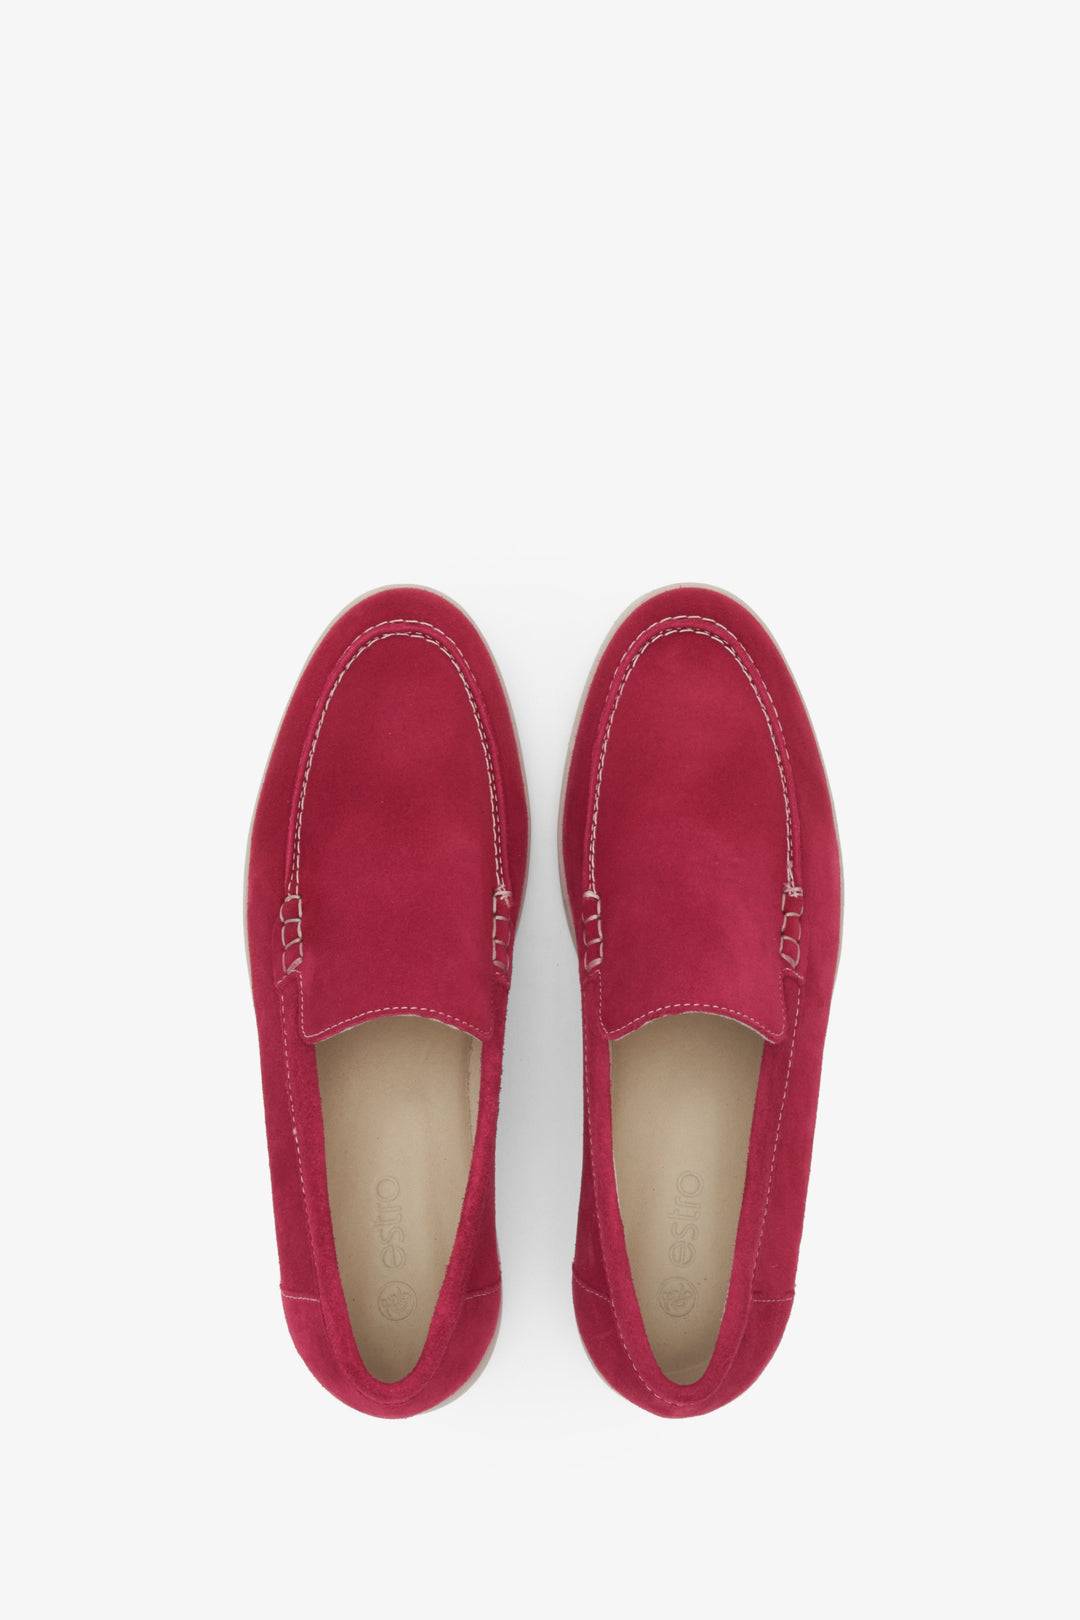 Women's suede moccasins in pink Estro - presentation of footwear from above.